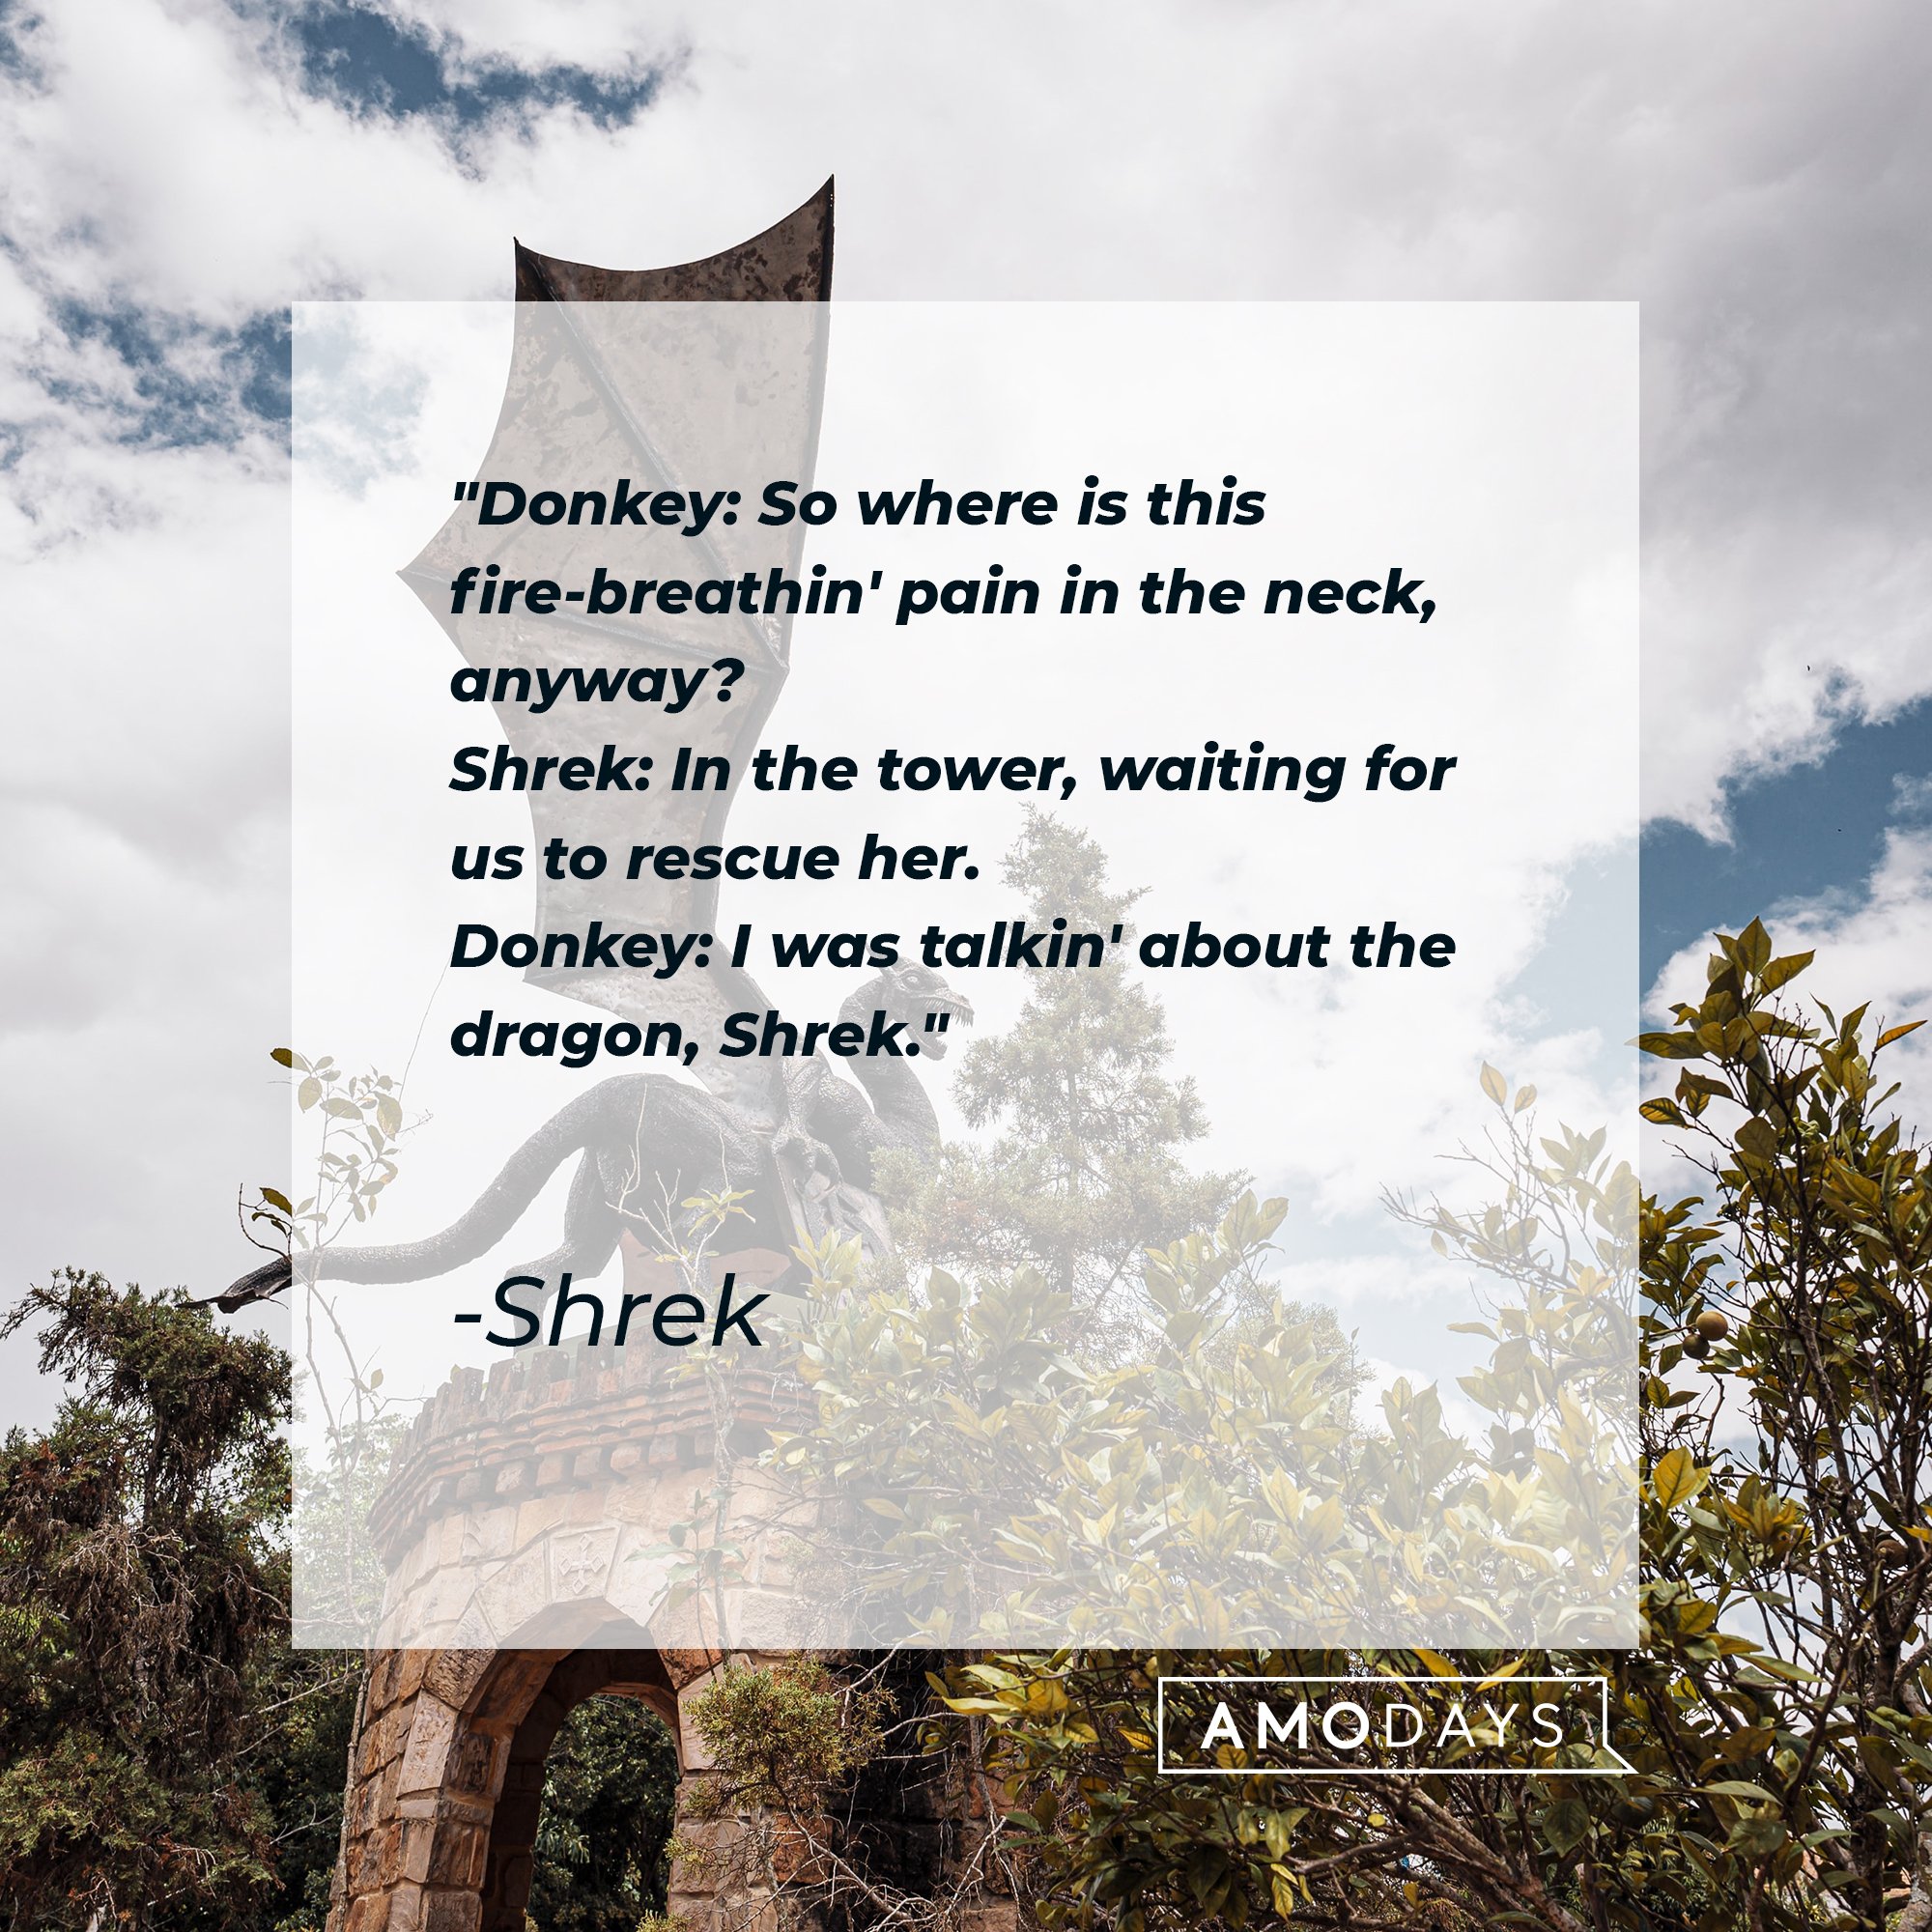 “Shrek” dialogue: "Donkey: So where is this fire-breathin' pain in the neck, anyway?  Shrek: In the tower, waiting for us to rescue her.  Donkey: I was talkin' about the dragon, Shrek." | Image: AmoDays